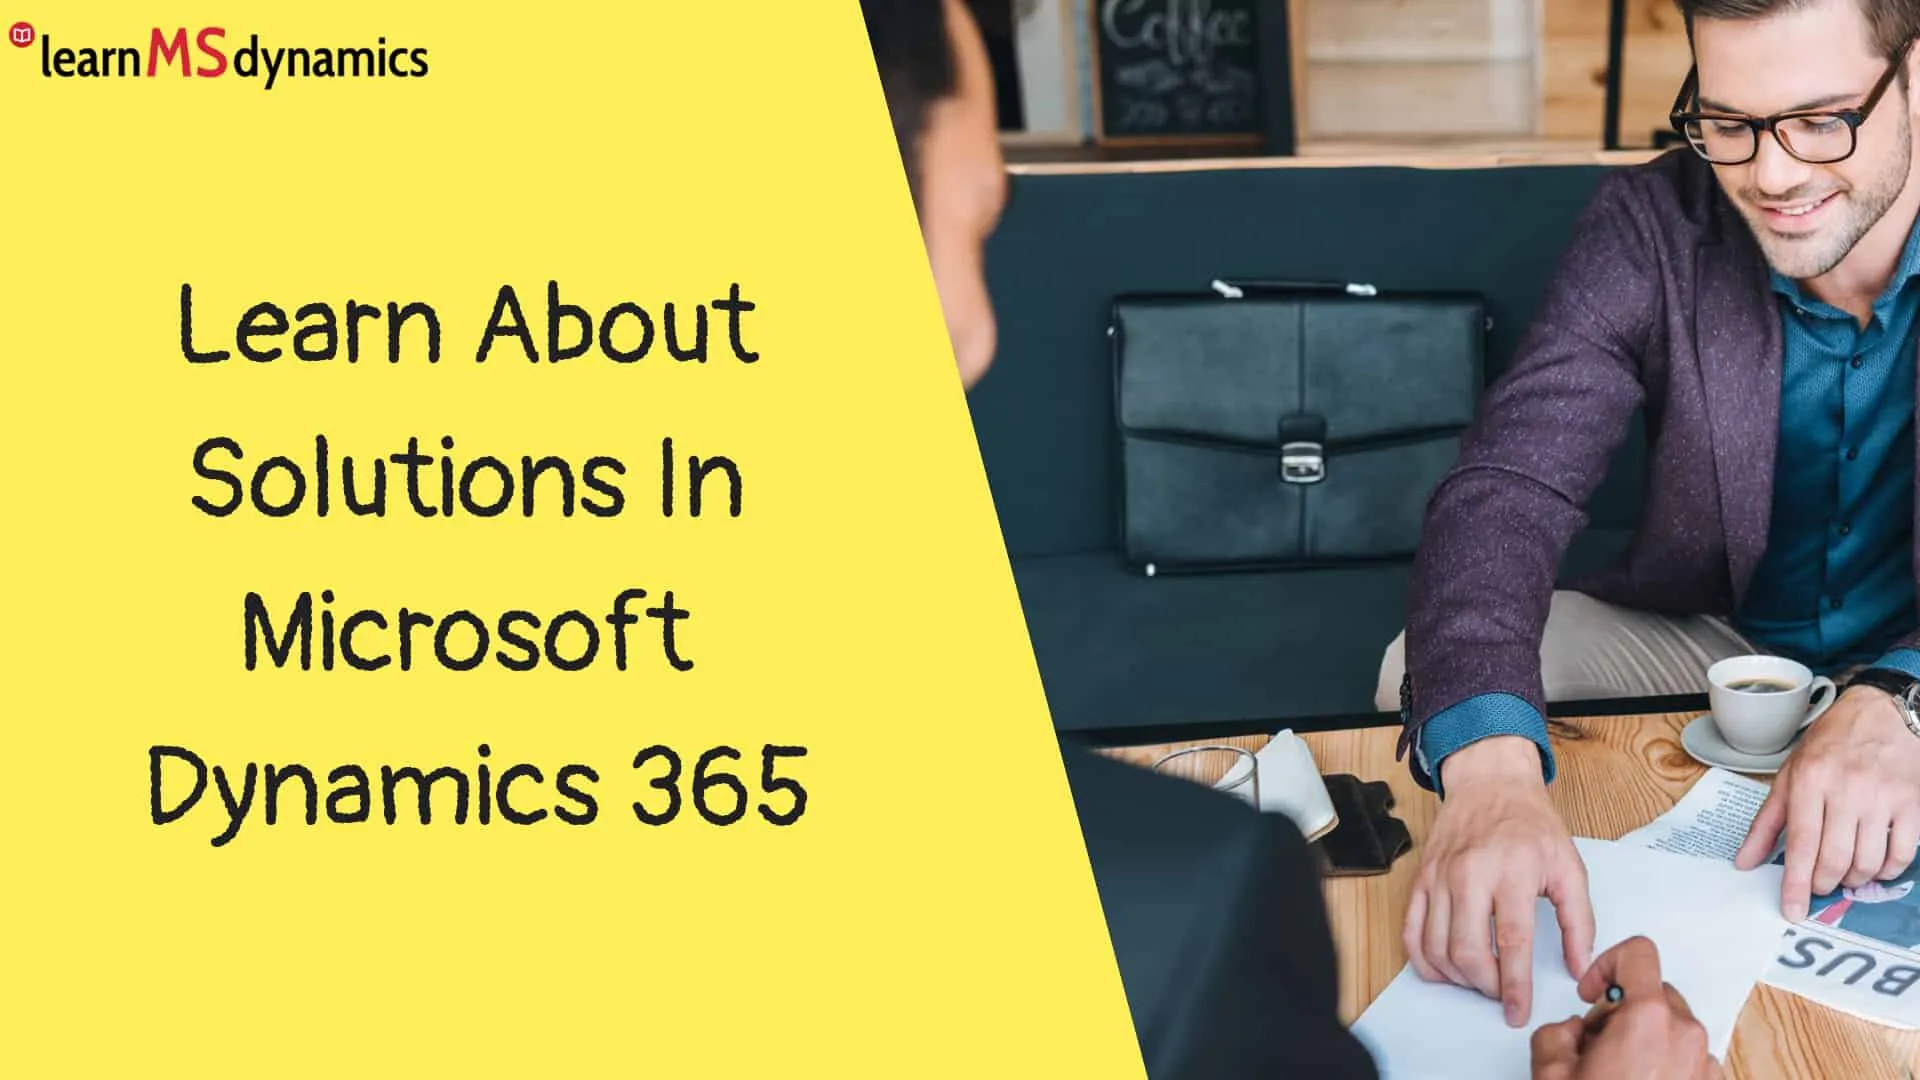 Learn About Solutions In Microsoft Dynamics 365